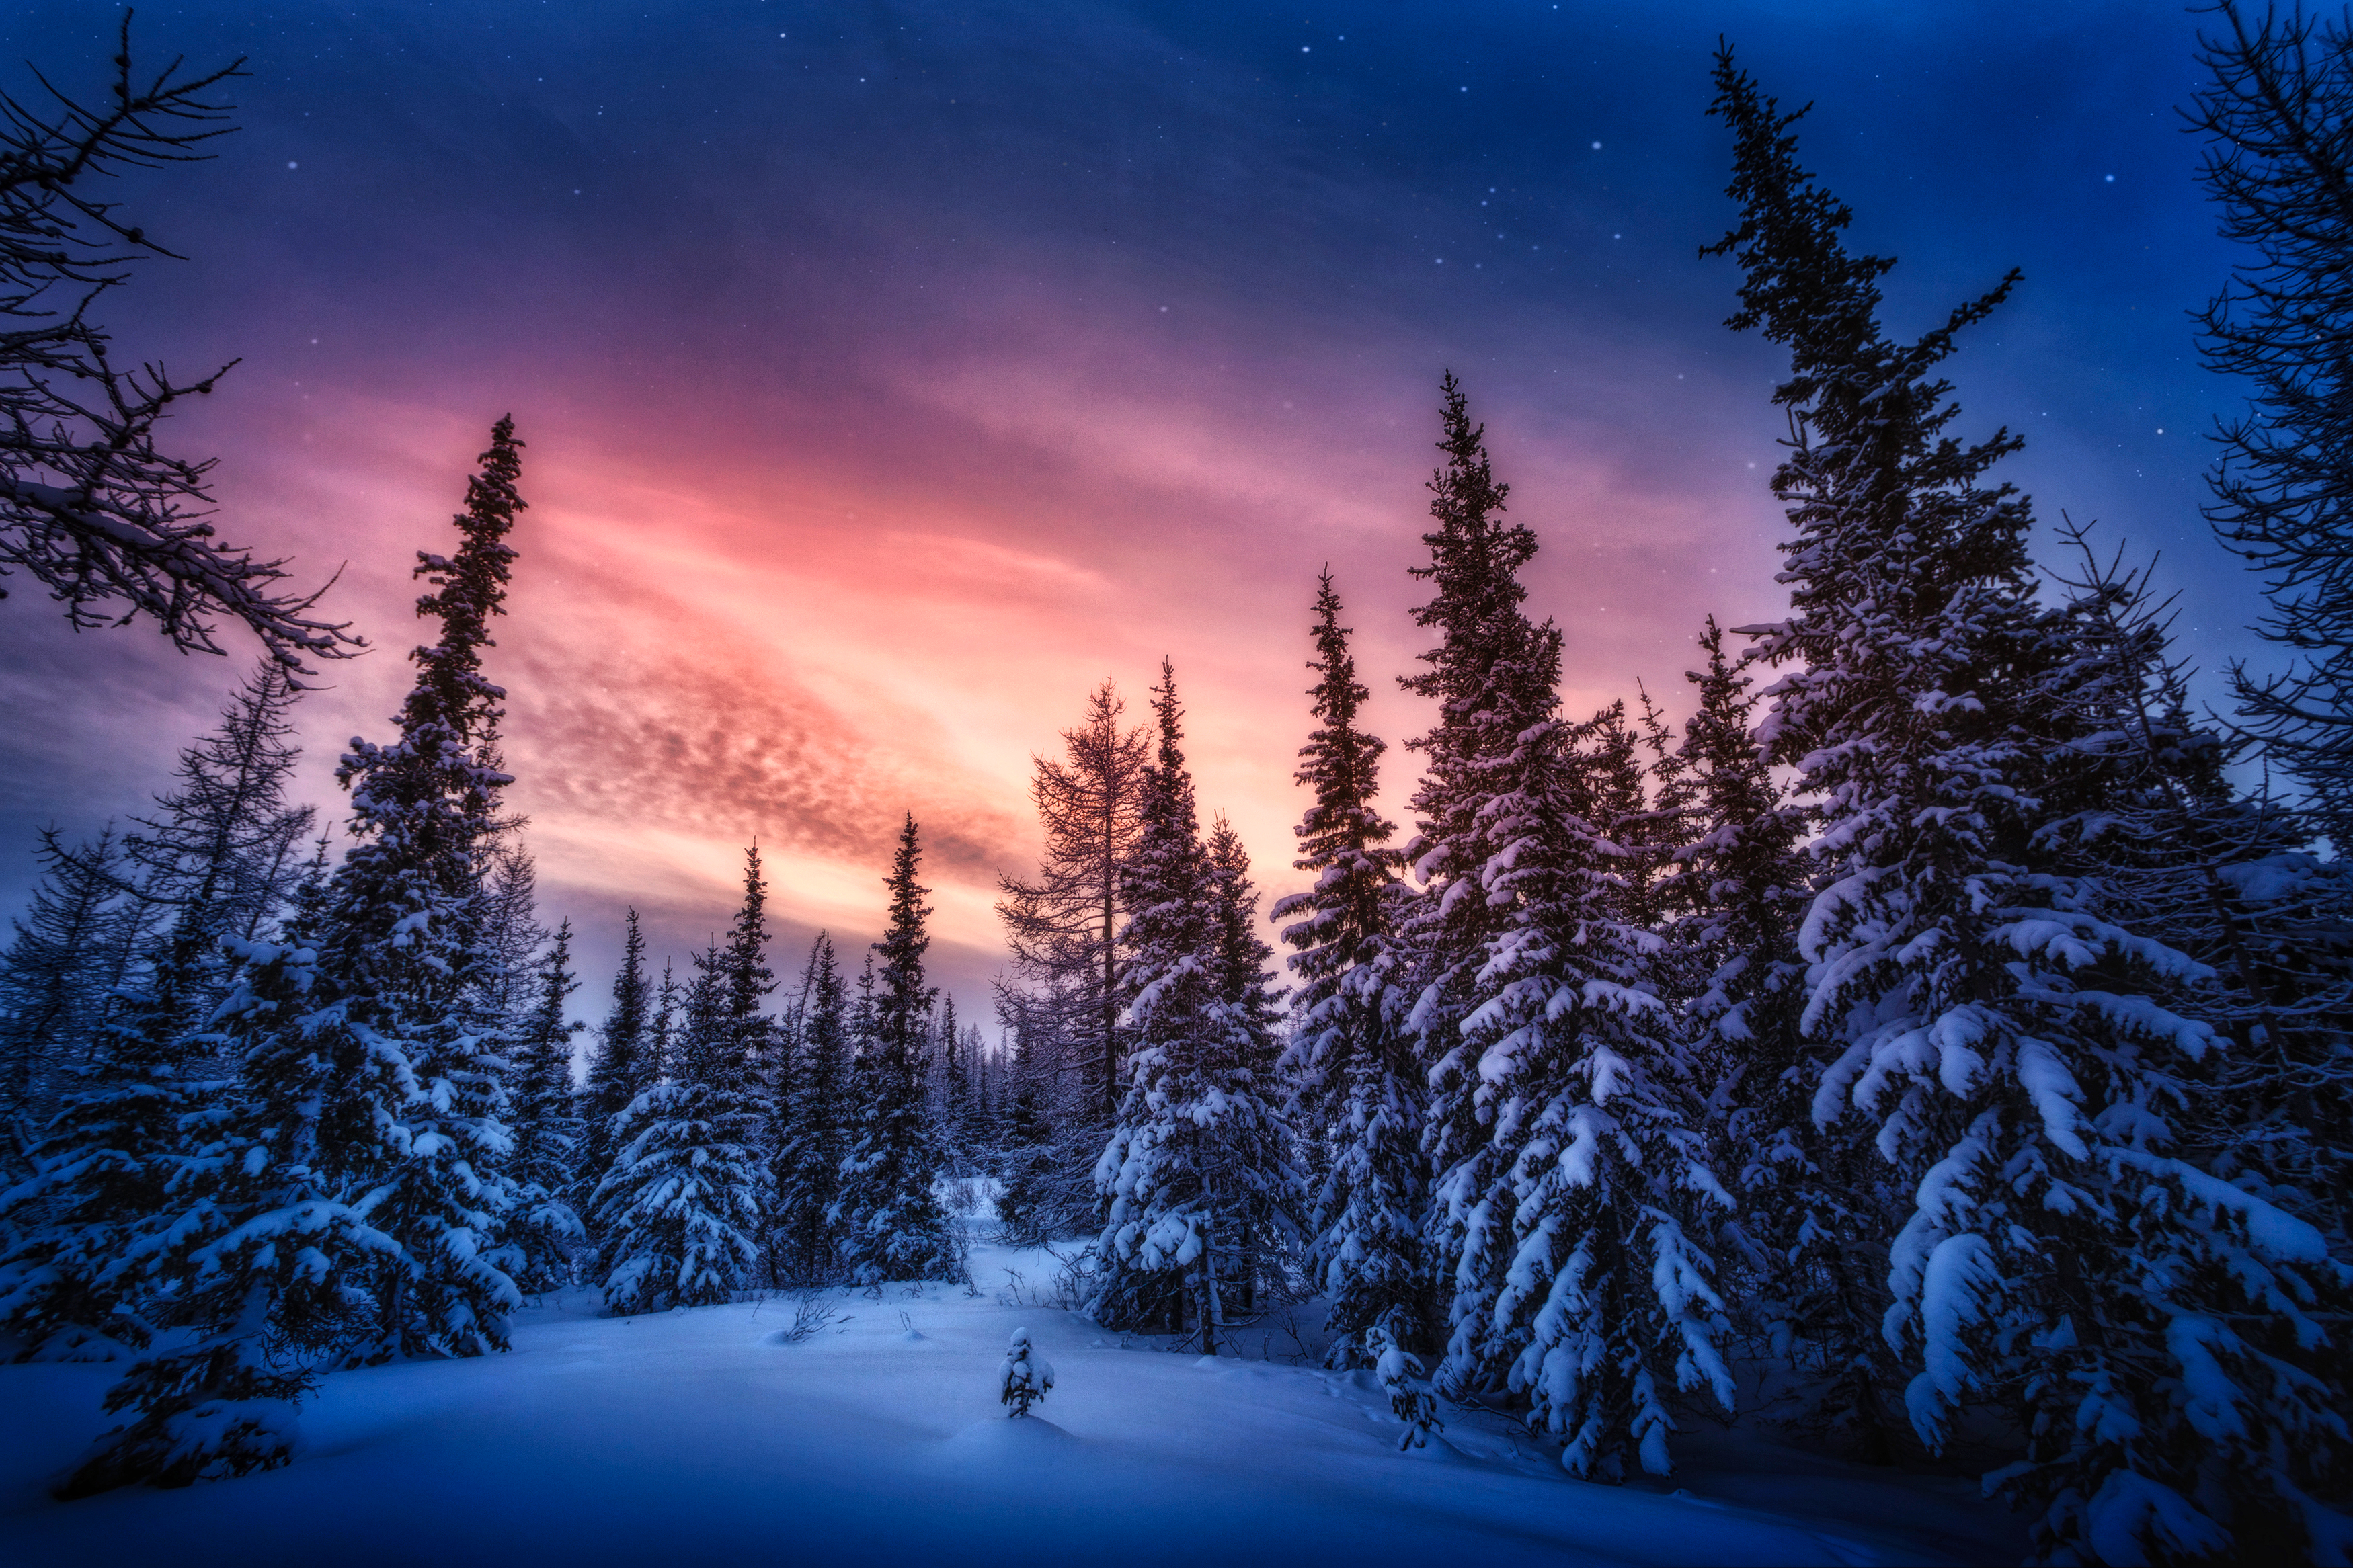 Winter Snow Landscape Outdoors Nature Night Sky Clouds Photography Trees Snow Covered 3500x2333